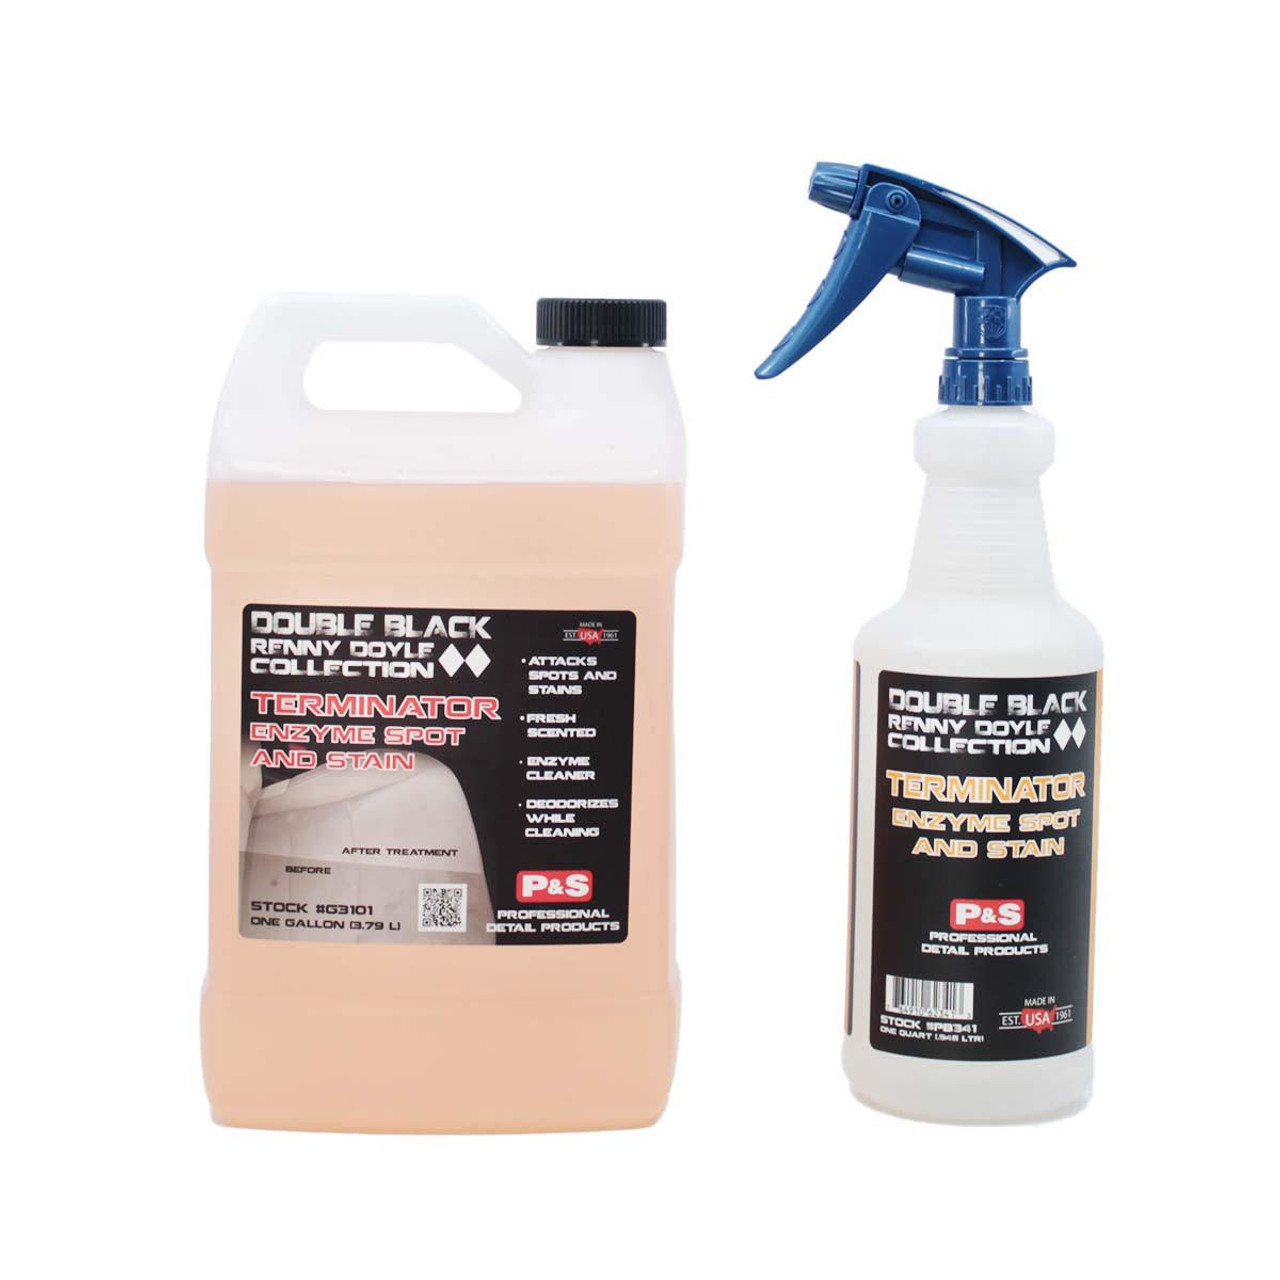 P and S Detailing Product PandS Terminator Enzyme Gallon And Bottle Combo